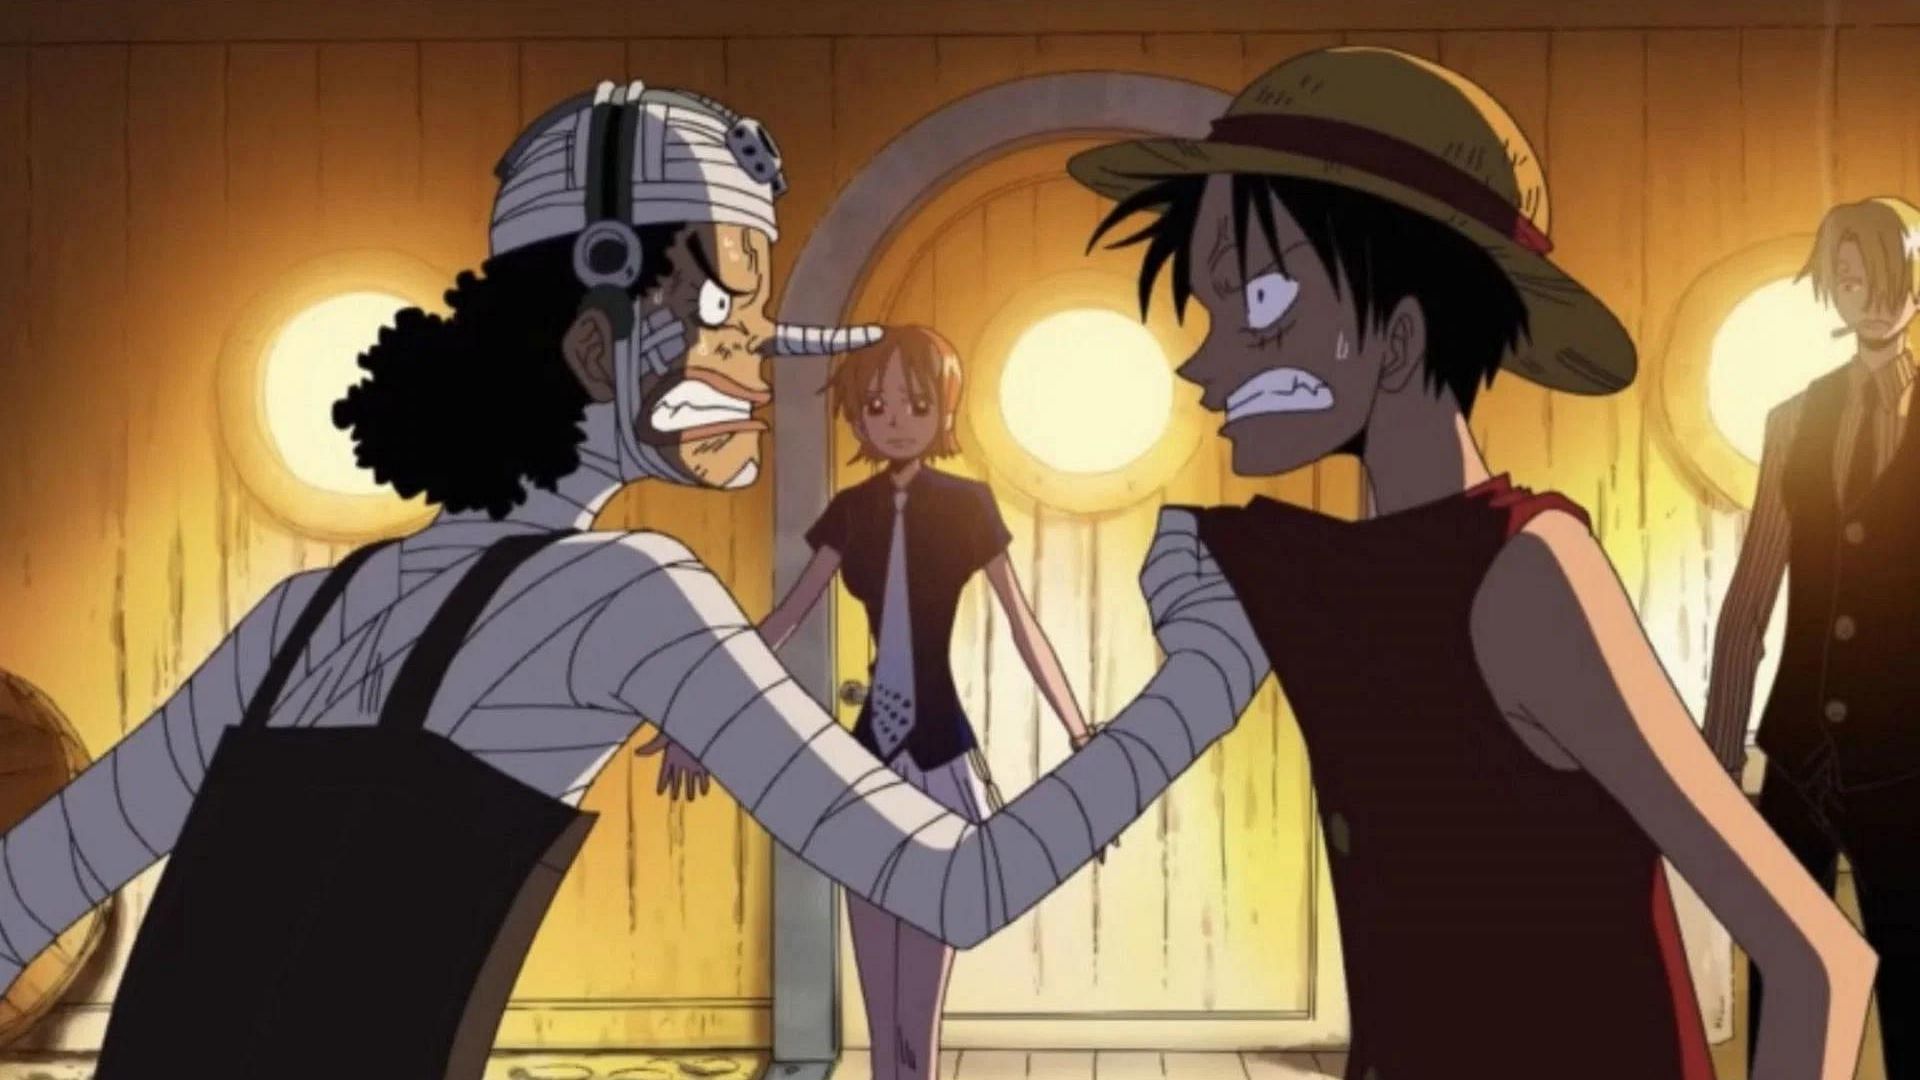 Usopp fights Luffy to save Going Merry (Image via Toei Animation)